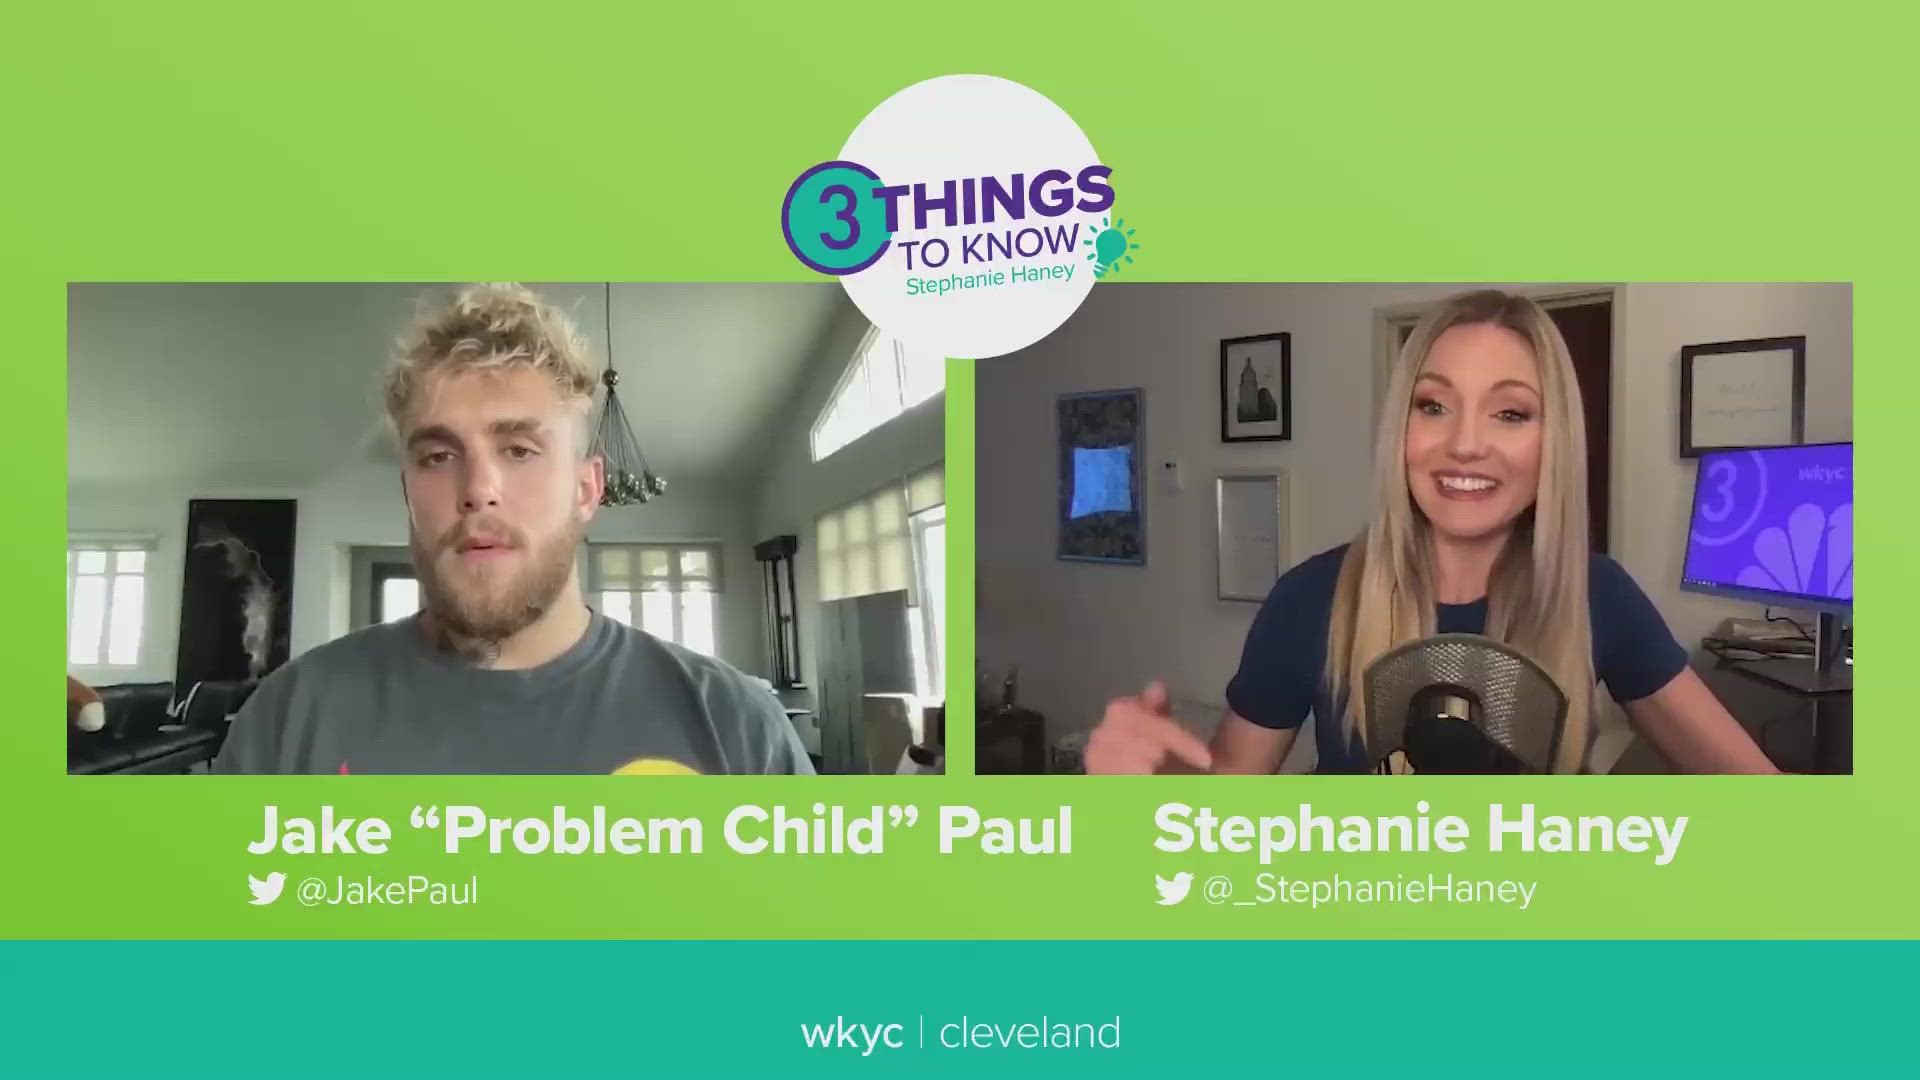 Speaking to 3News' Stephanie Haney, Jake Paul discussed his upcoming fight against Tyron Woodley in his hometown of Cleveland.